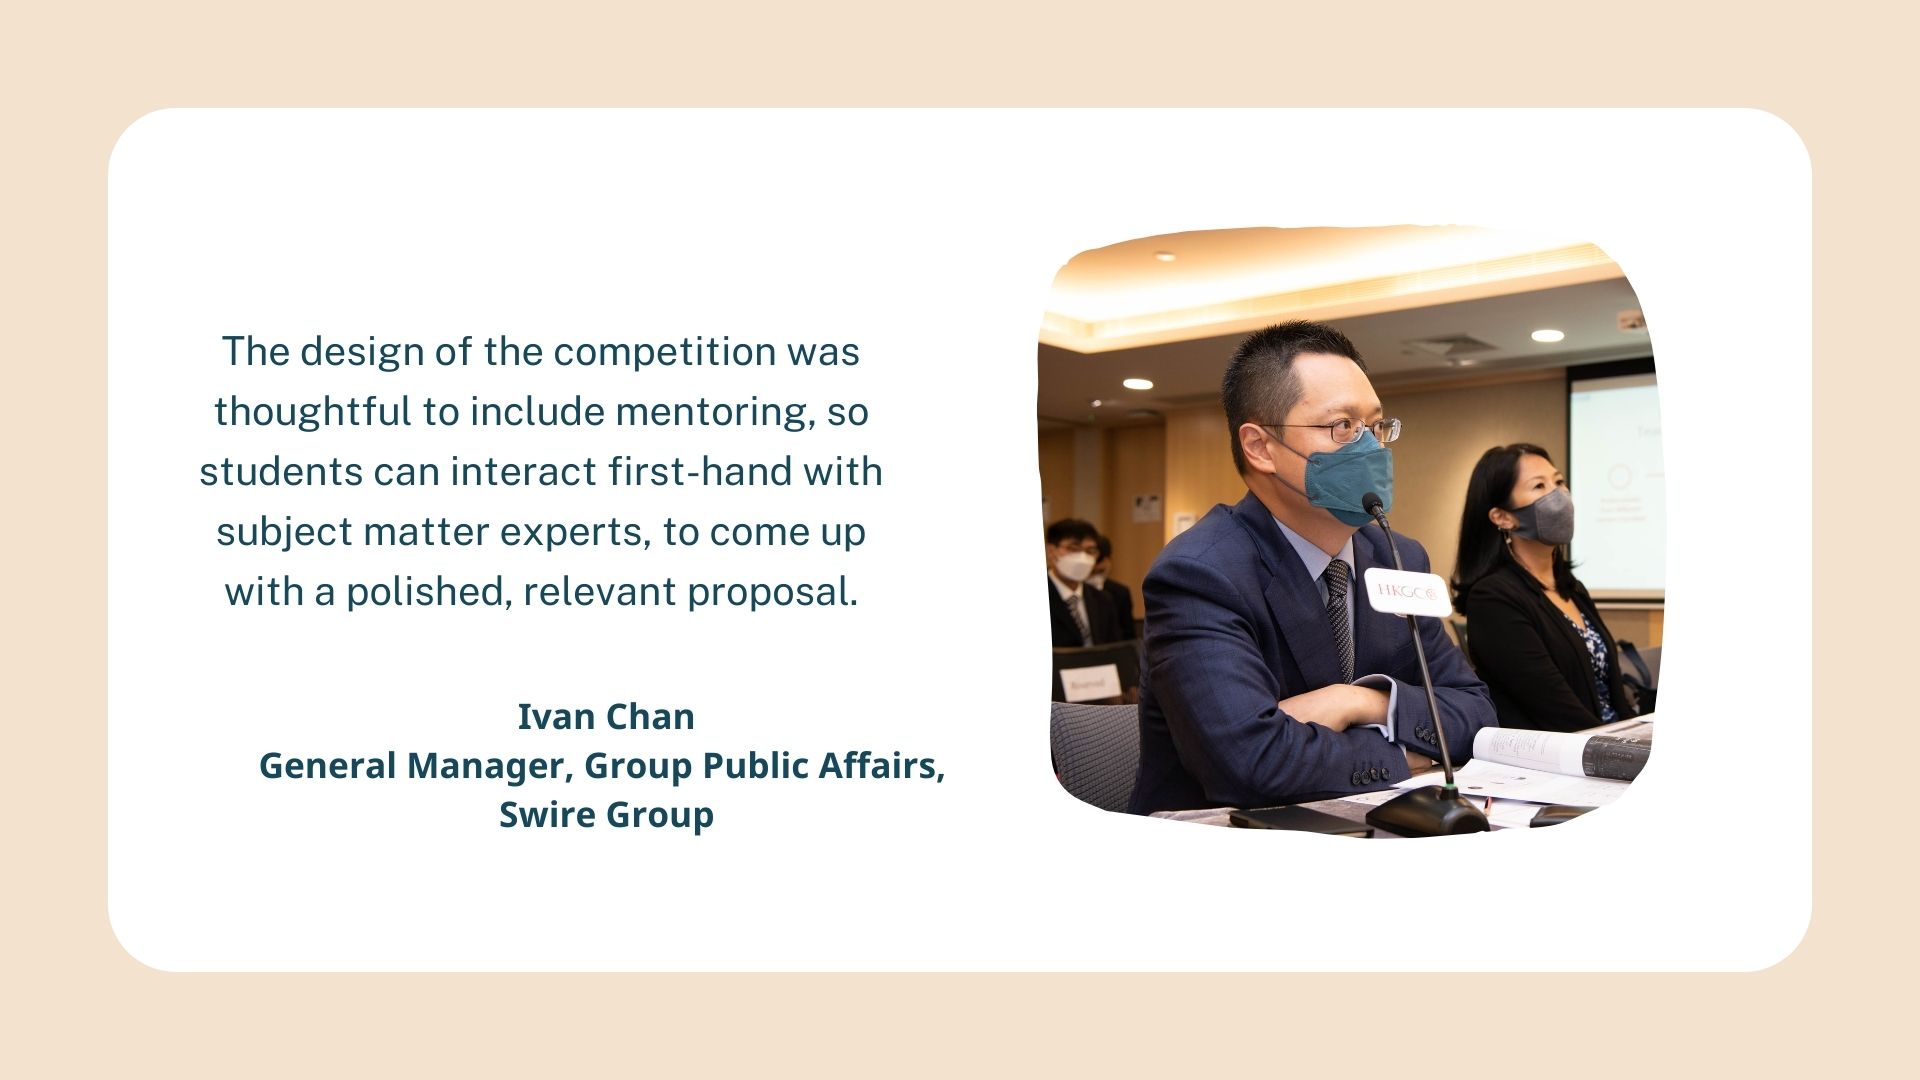 Ivan Chan, General Manager, Group Public Affairs, Swire Group